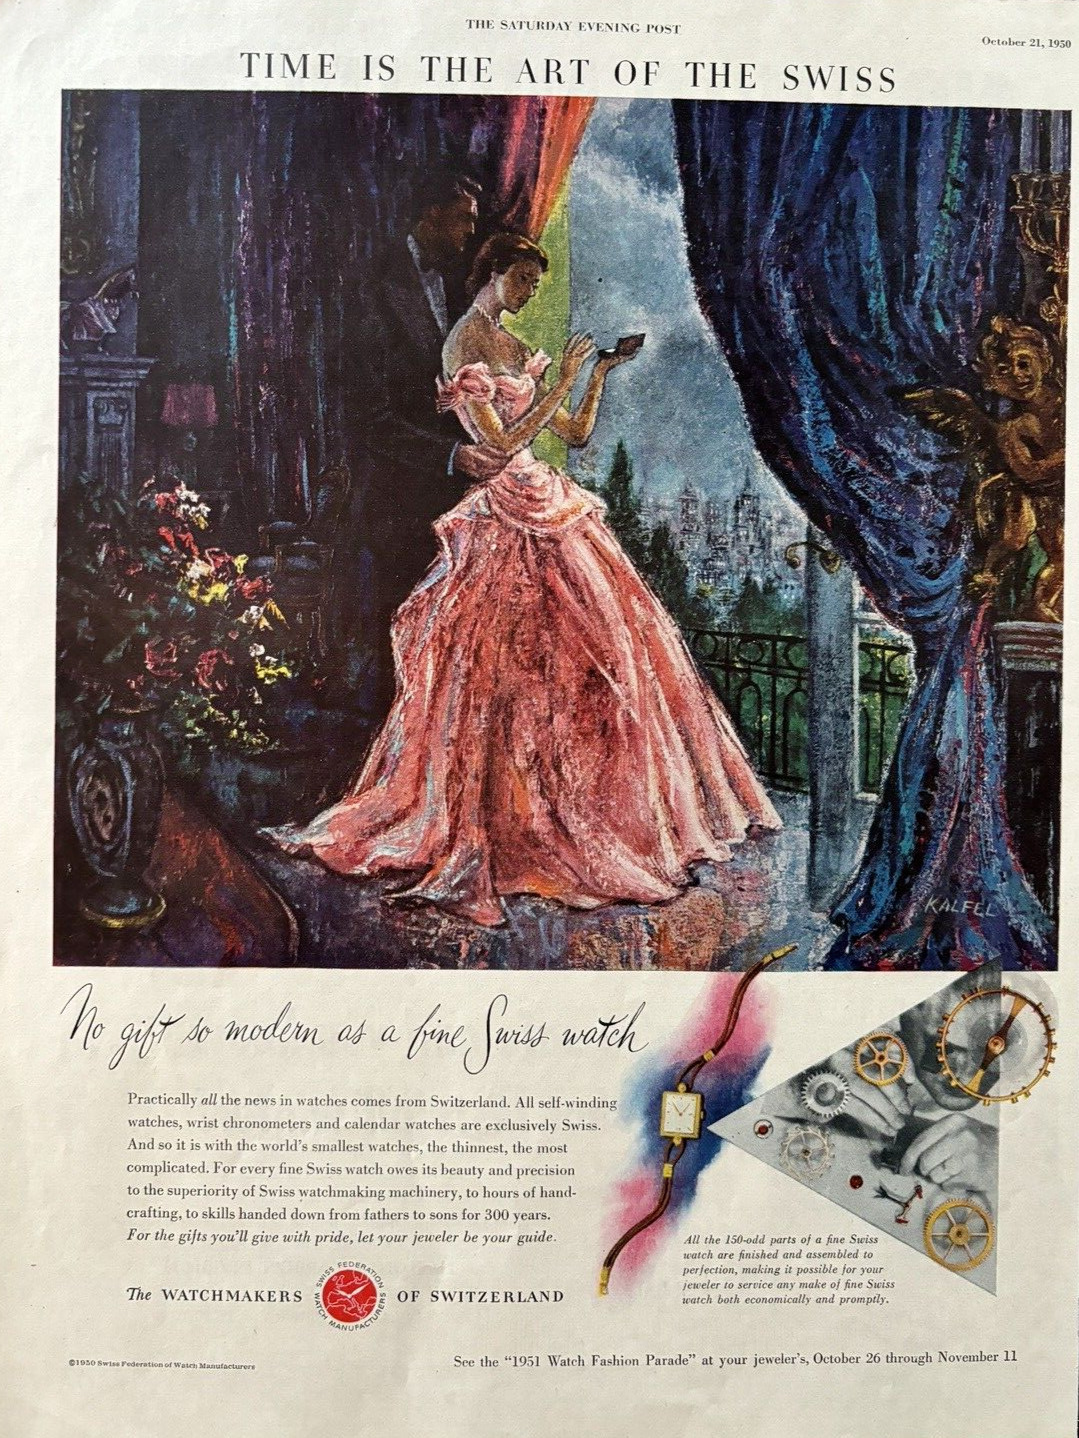 Swiss Federation Watch Manufactures Mechanisms Art Time Vintage Print Ad 1950.